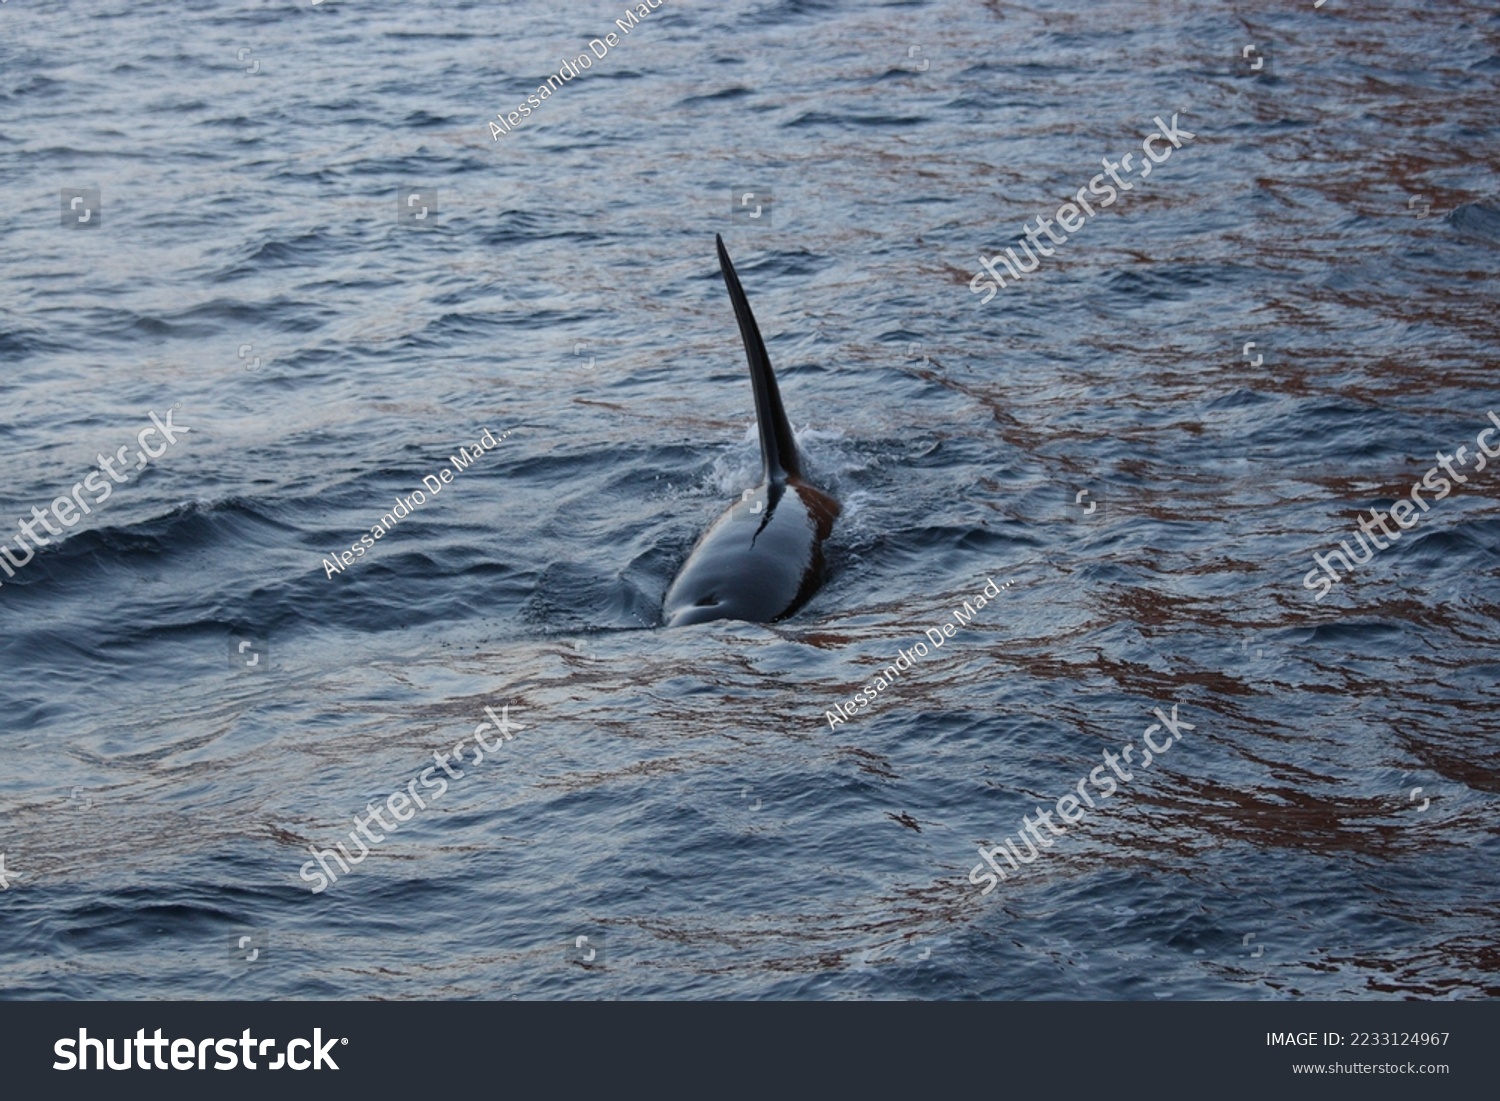 male orca or killer whale, Orcinus orca, encountered off Skjervoy, Norway #2233124967